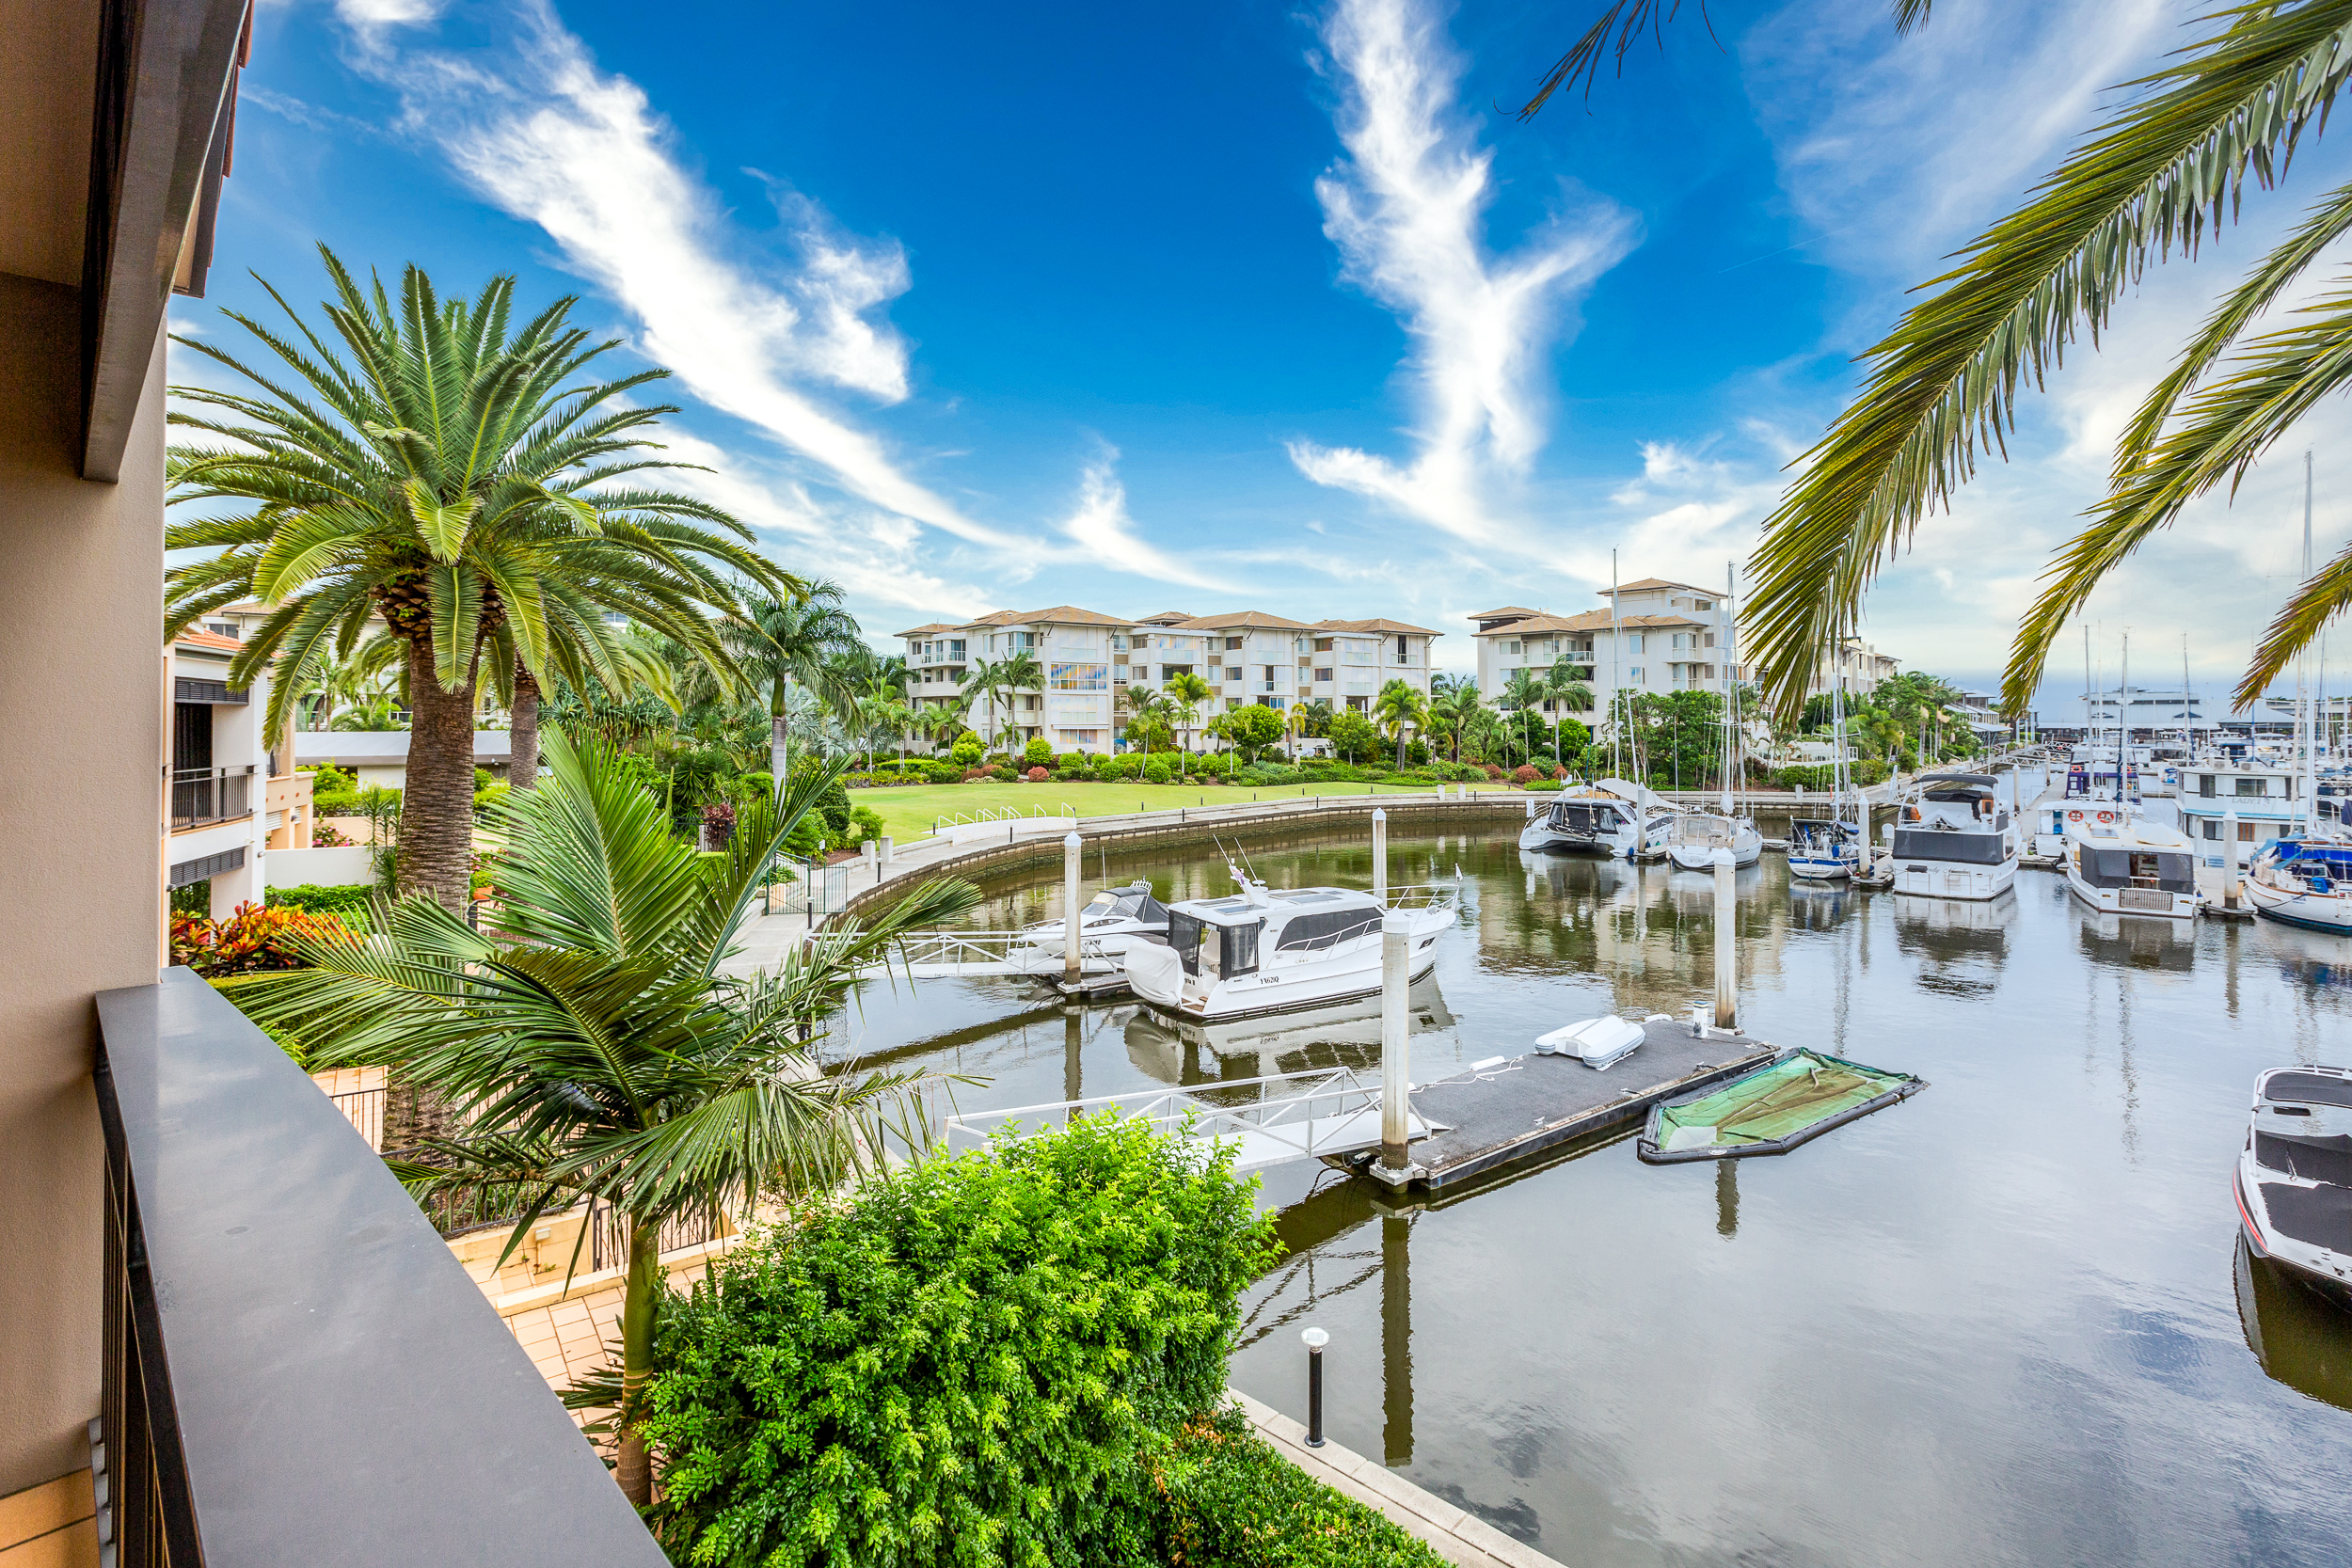 Resort Style Living at it’s Best! Location, Views, Pontoon, Security, this one has it all!